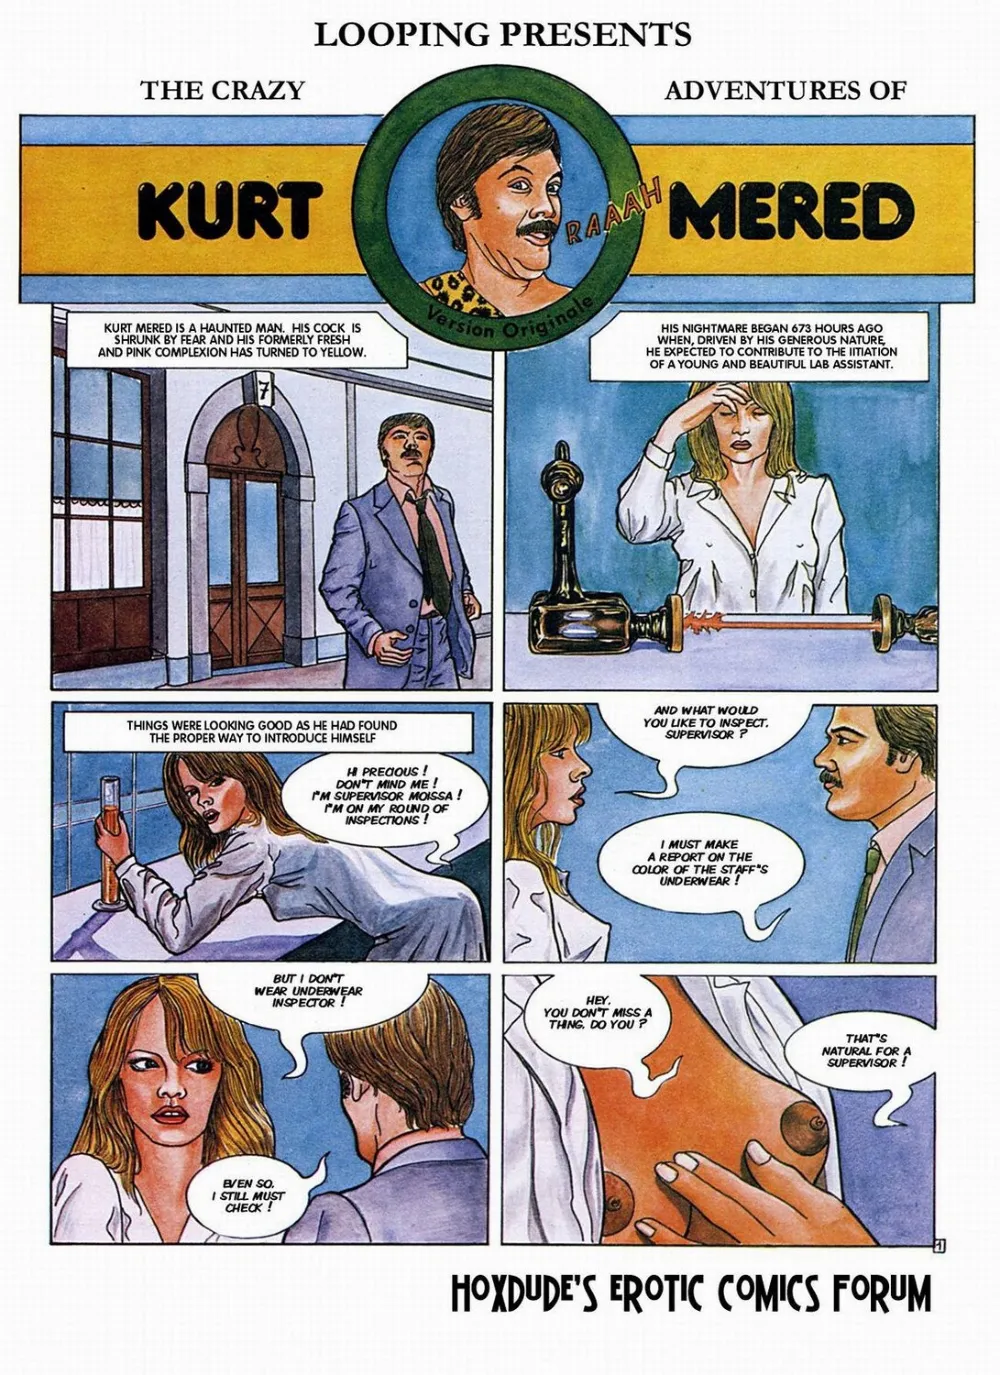 The Crazy Adventures of Kurt Mered (Looping) - Page 3